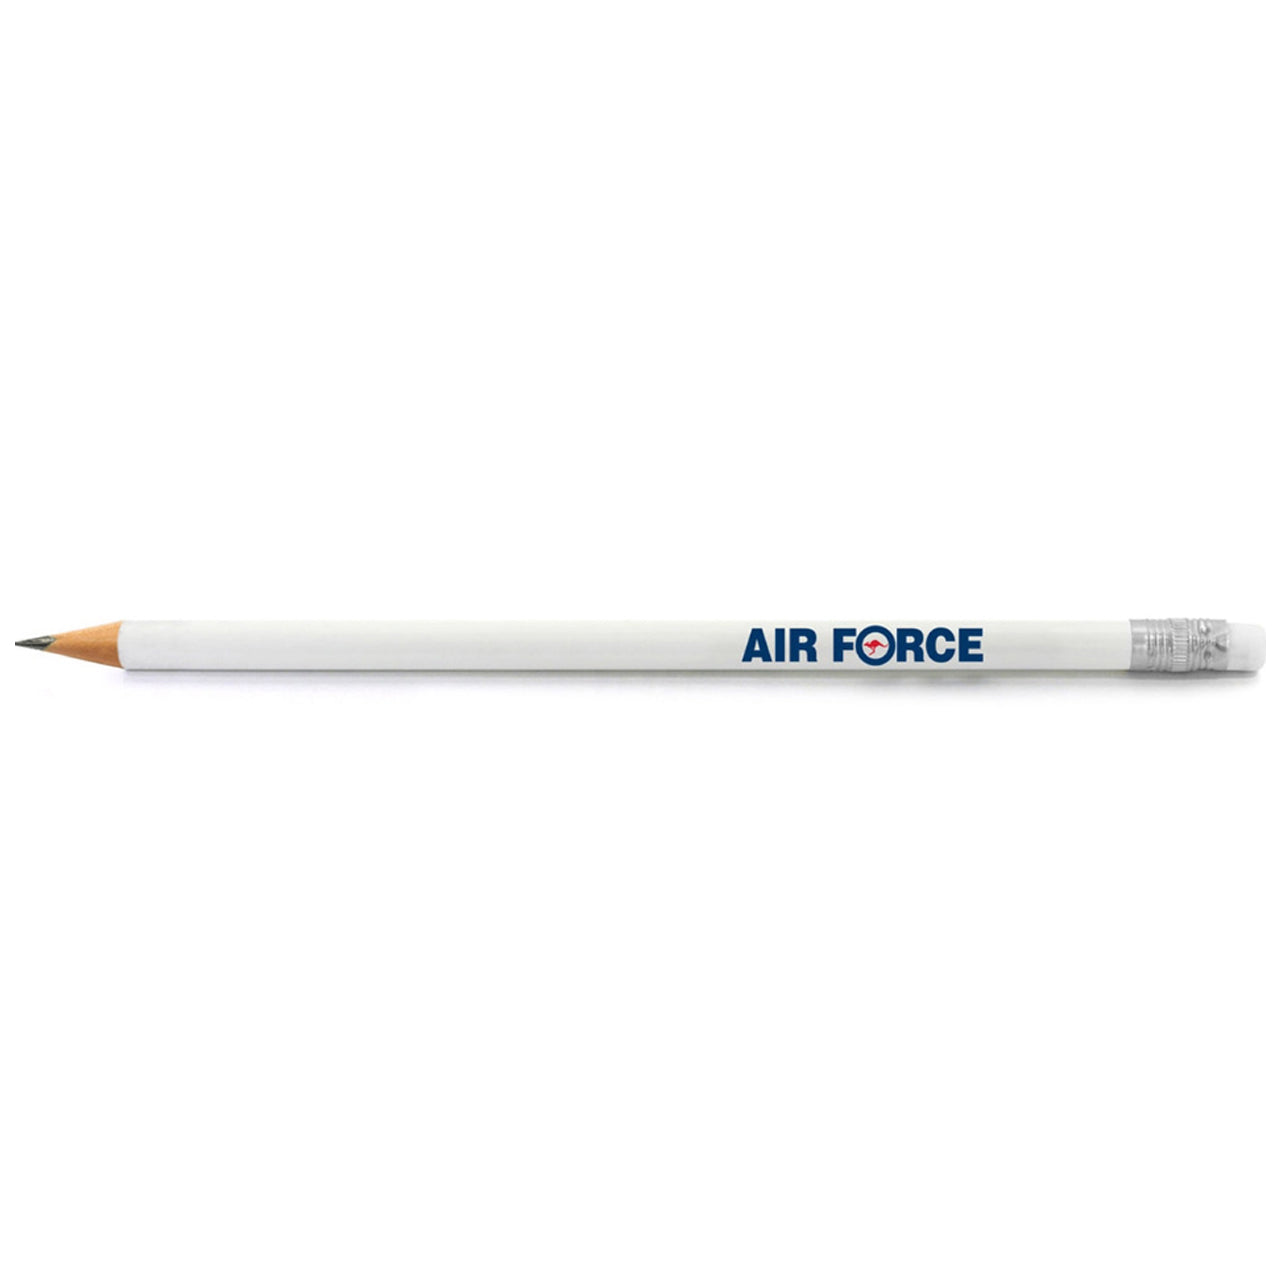 Air Force branded HB pencil with an eraser. Perfect promotional gift item for school visits and events.